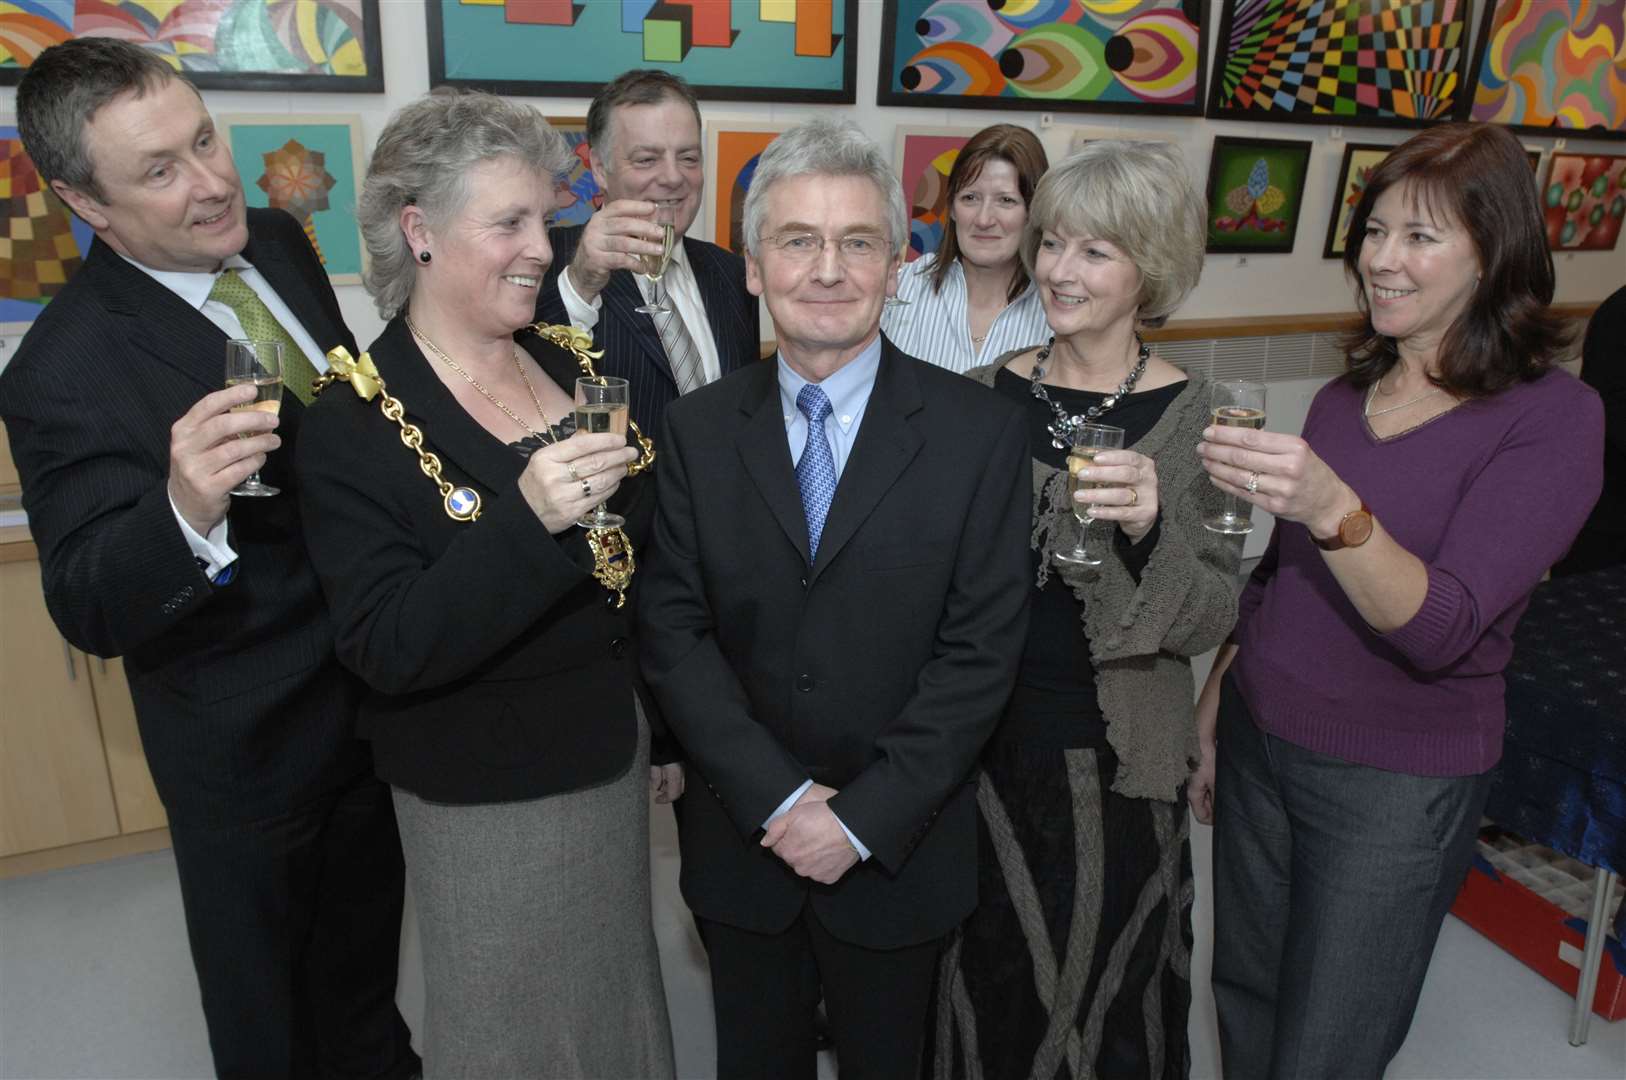 Trevor Gasson, deputy chief executive, centre, retired from the council in 2009